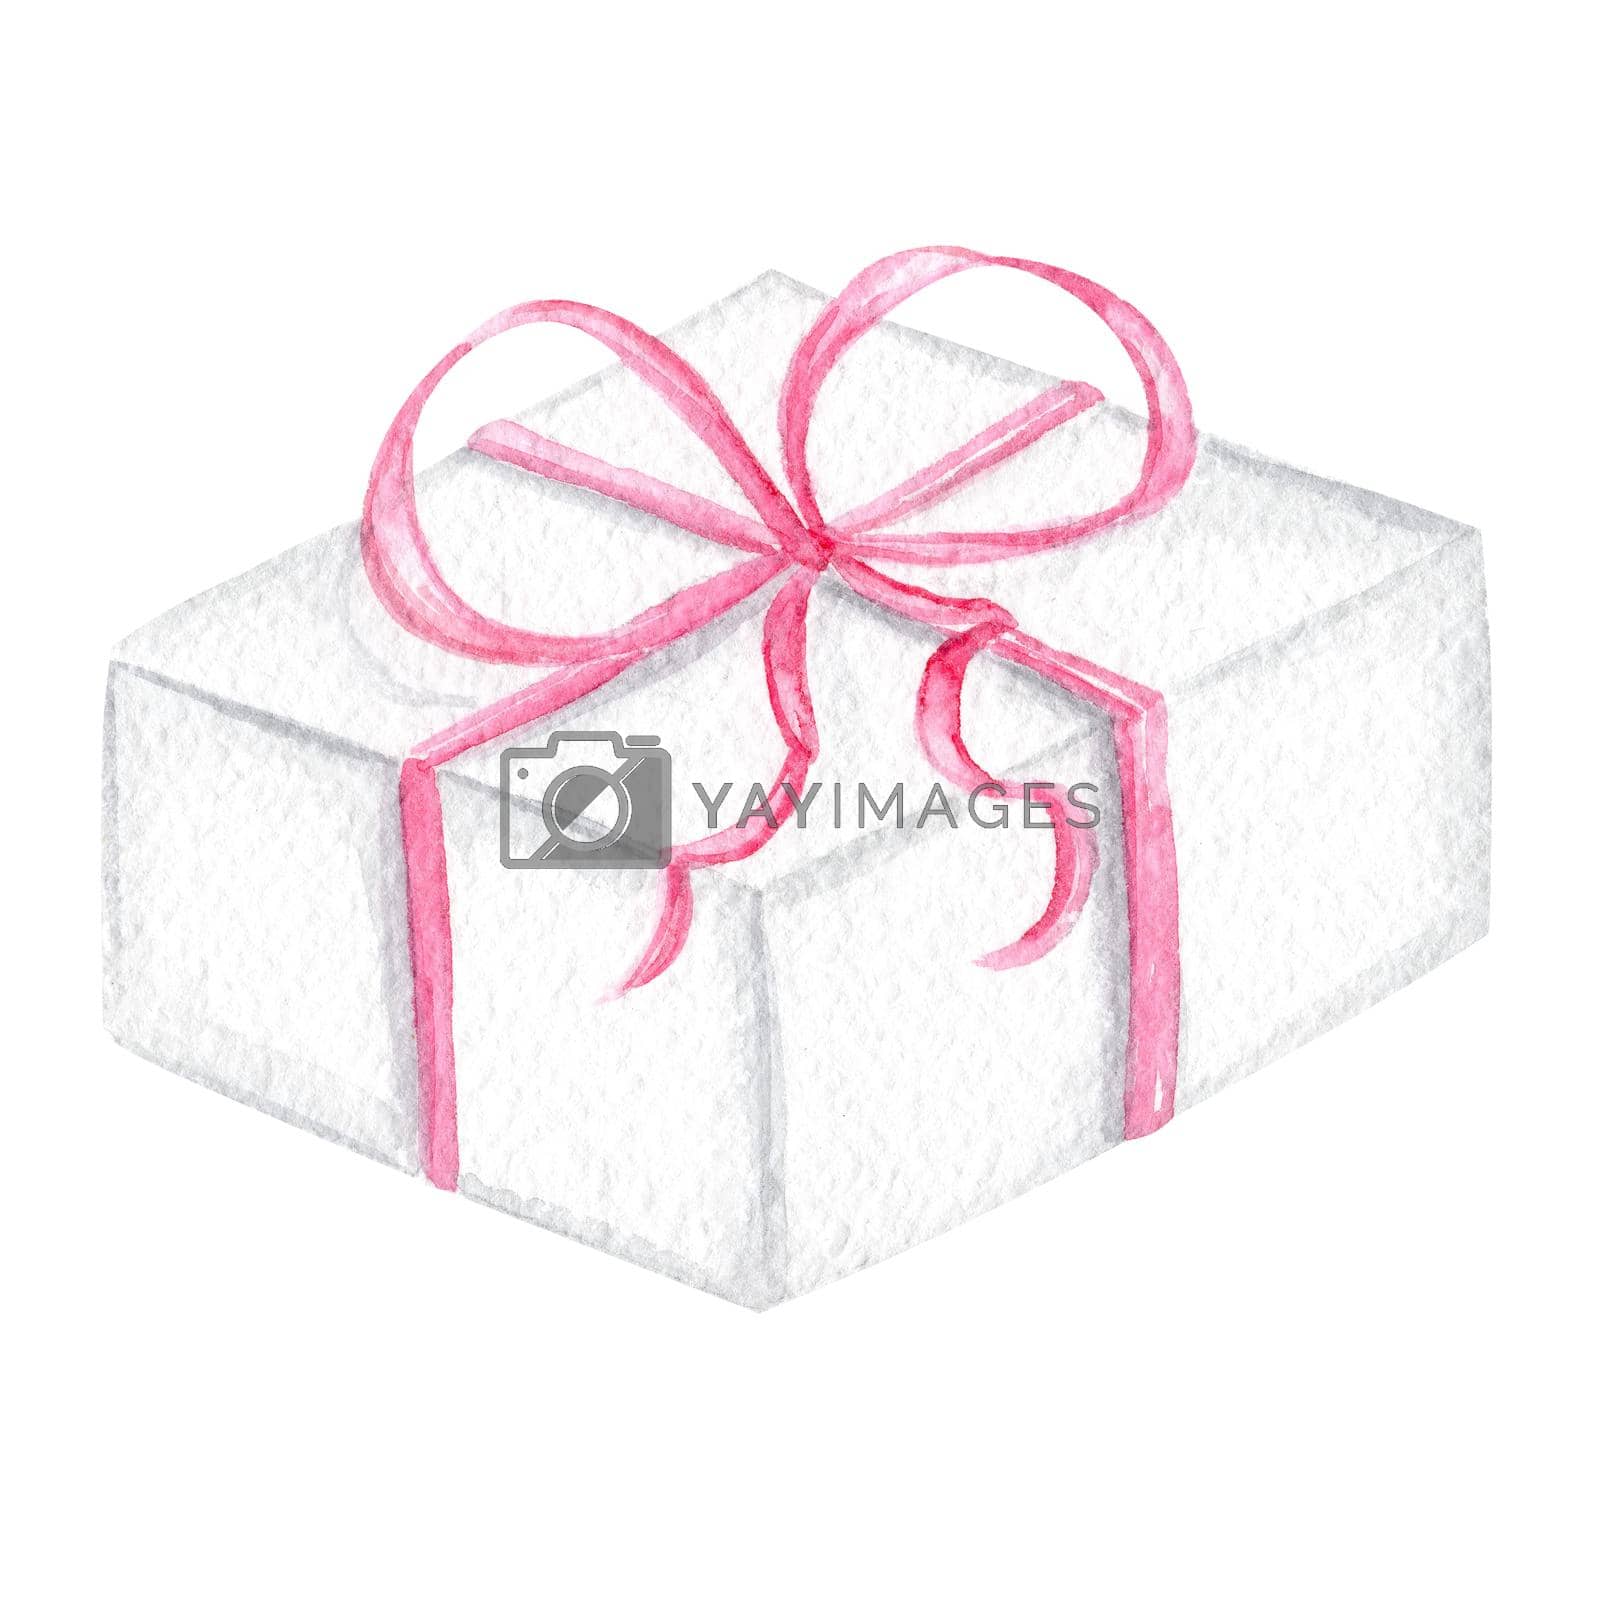 Royalty free image of watercolor white gift box with pink ribbon and bow isolated on white background for birthday party invitations and cards by dreamloud